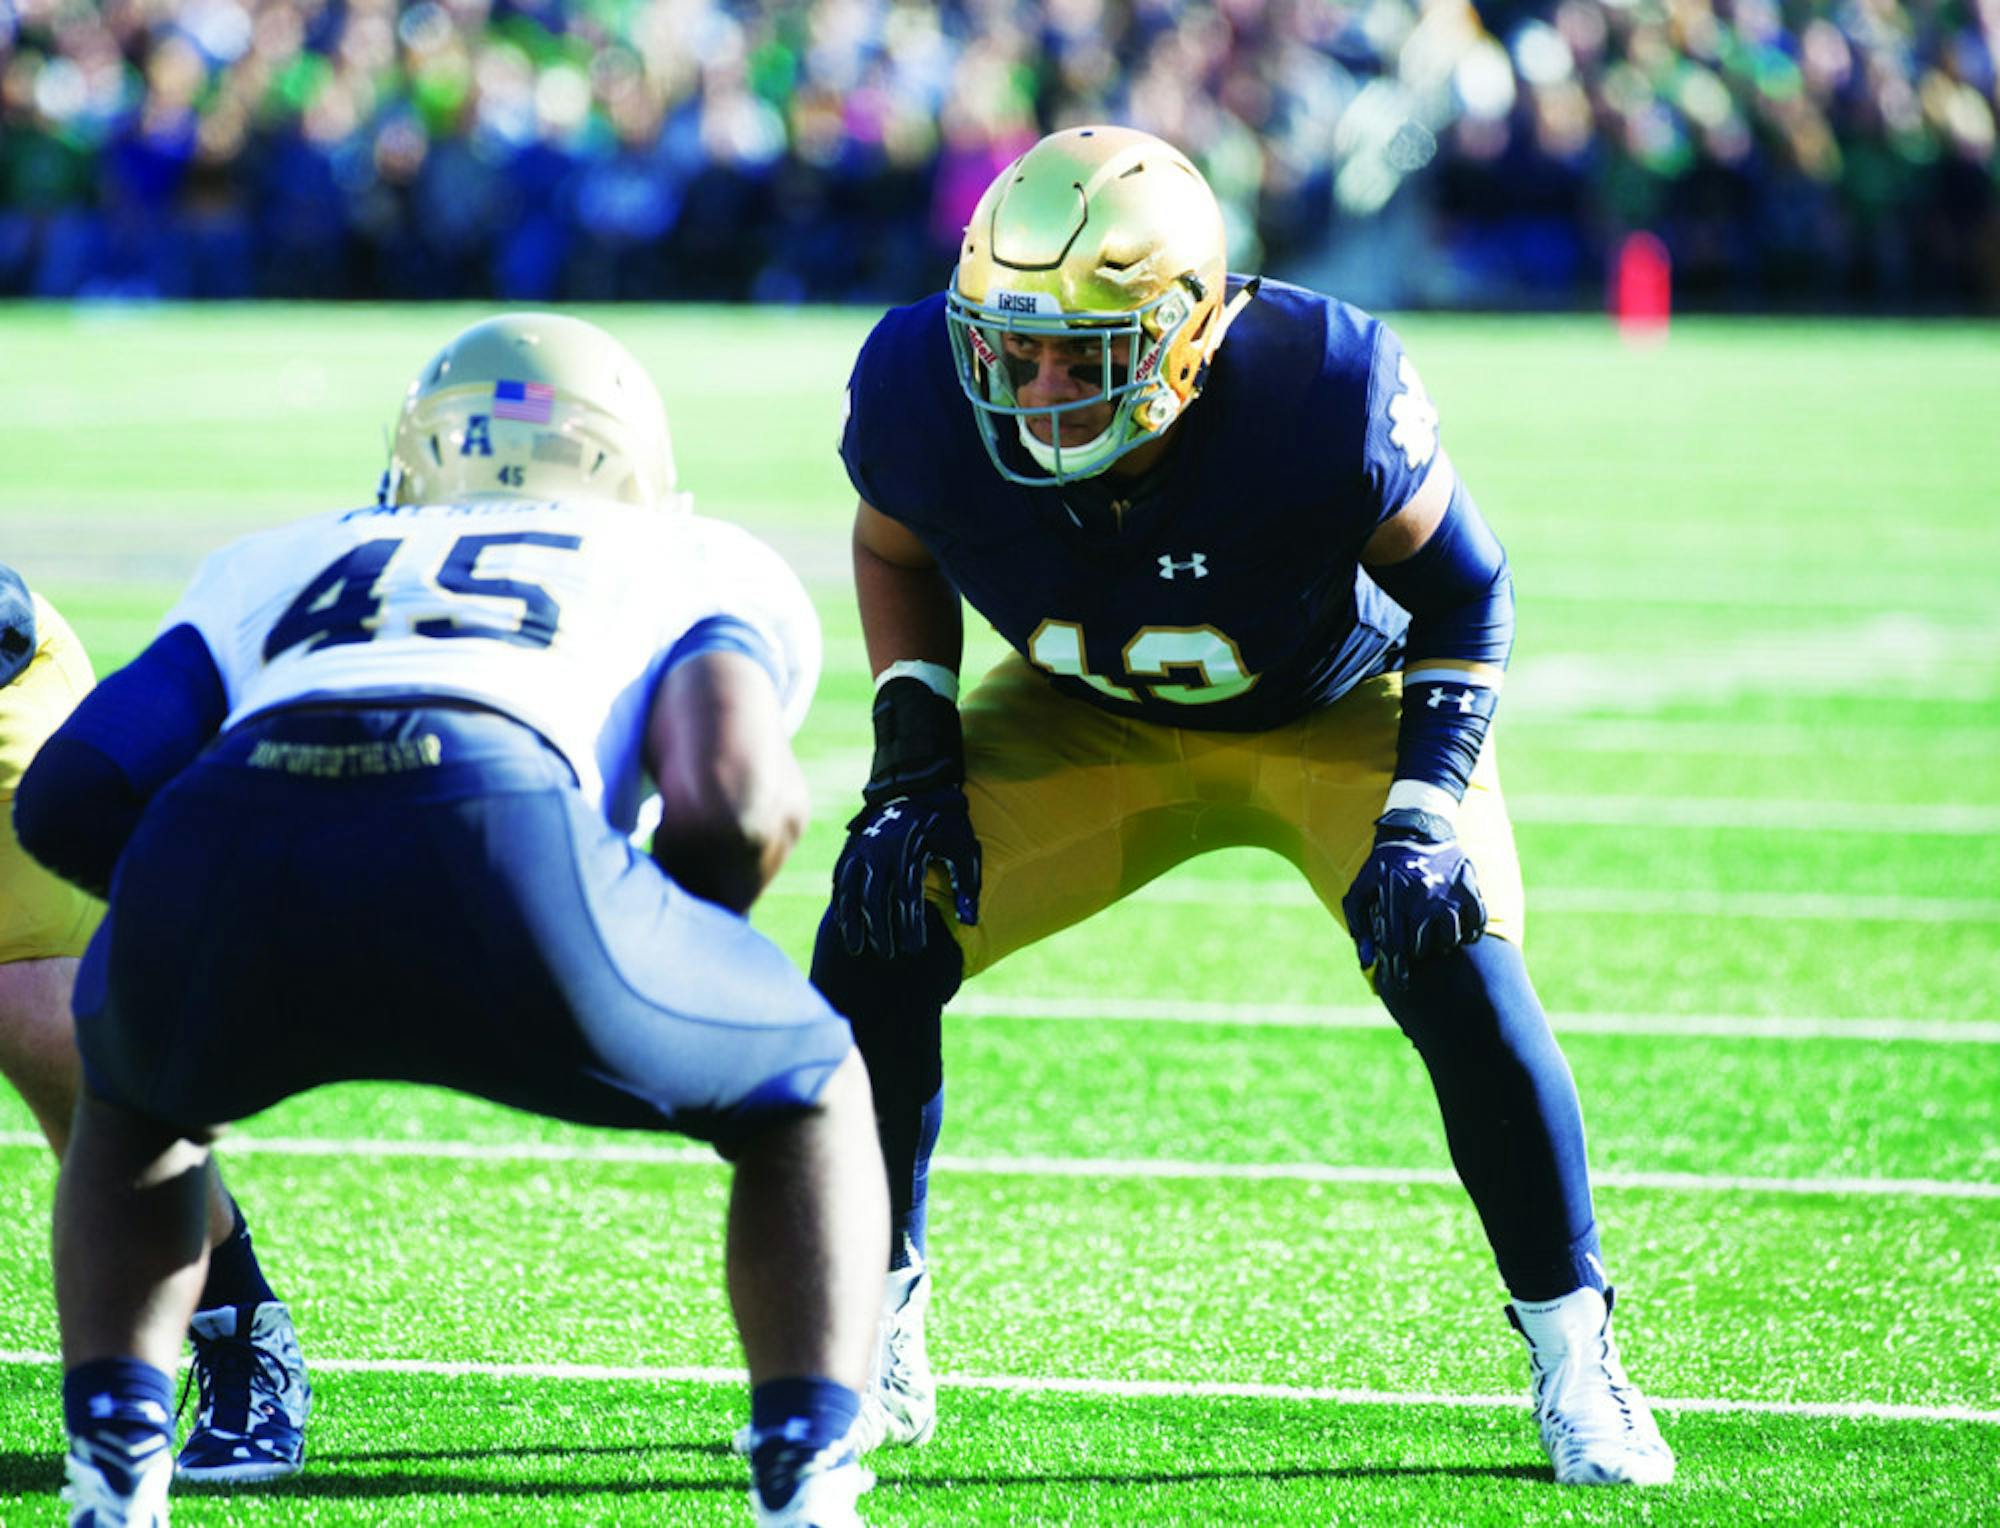 Irish sophomore tight end Tyler Luatua lines up across from Navy sophomore linebacker Micah Thomas during Notre Dame’s 41-24 victory over the Midshipmen on Oct. 10 at Notre Dame Stadium.